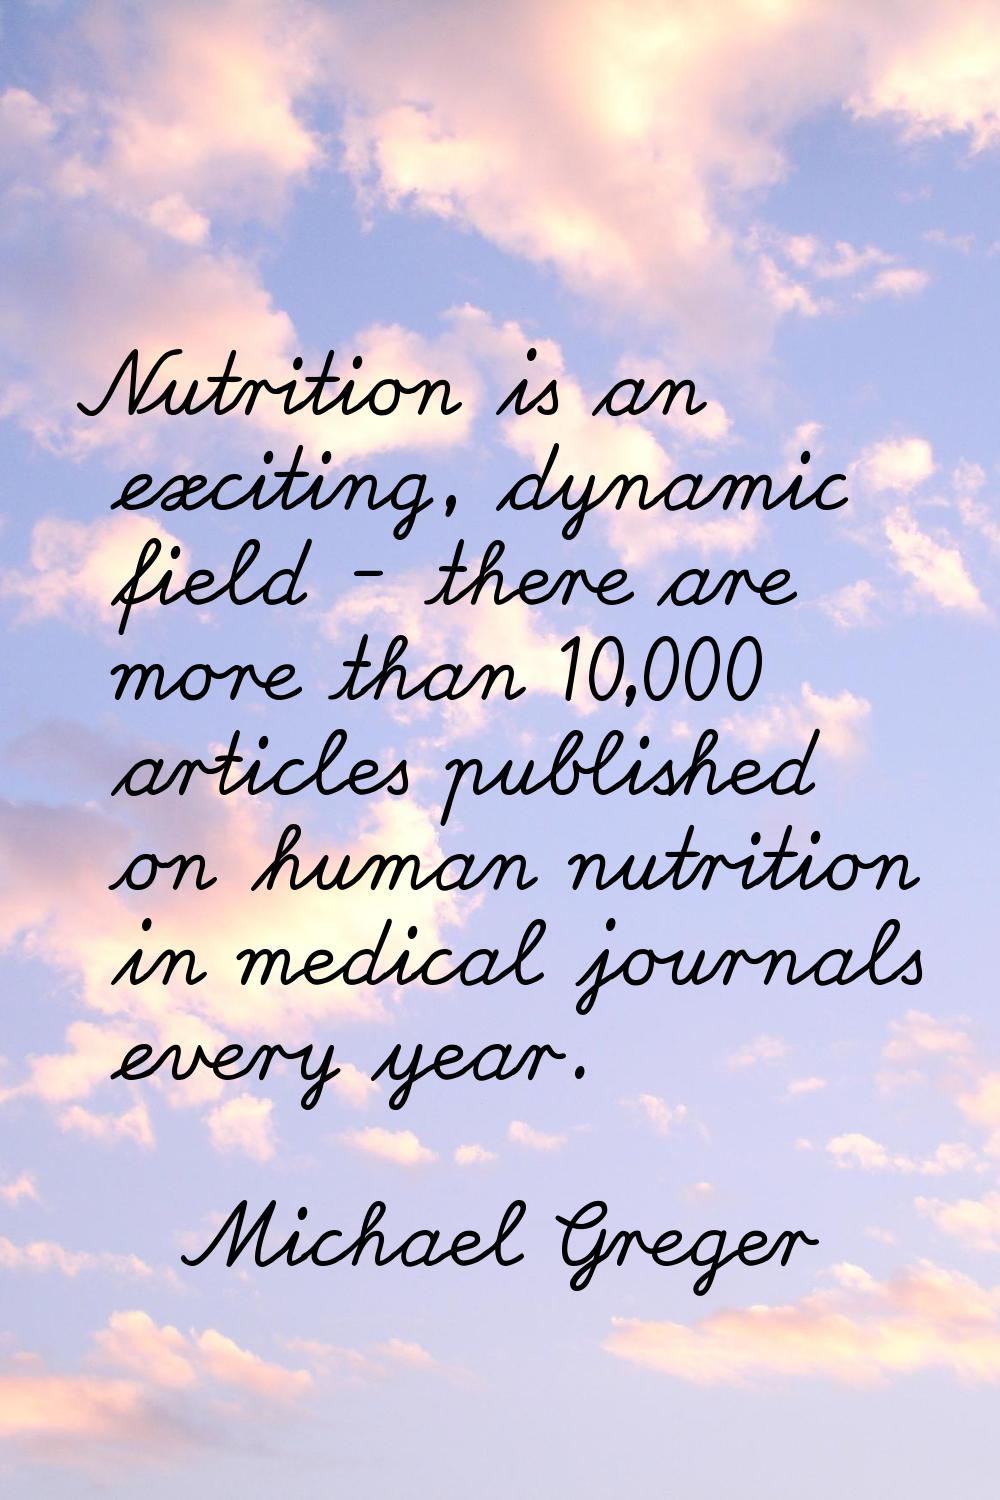 Nutrition is an exciting, dynamic field - there are more than 10,000 articles published on human nu